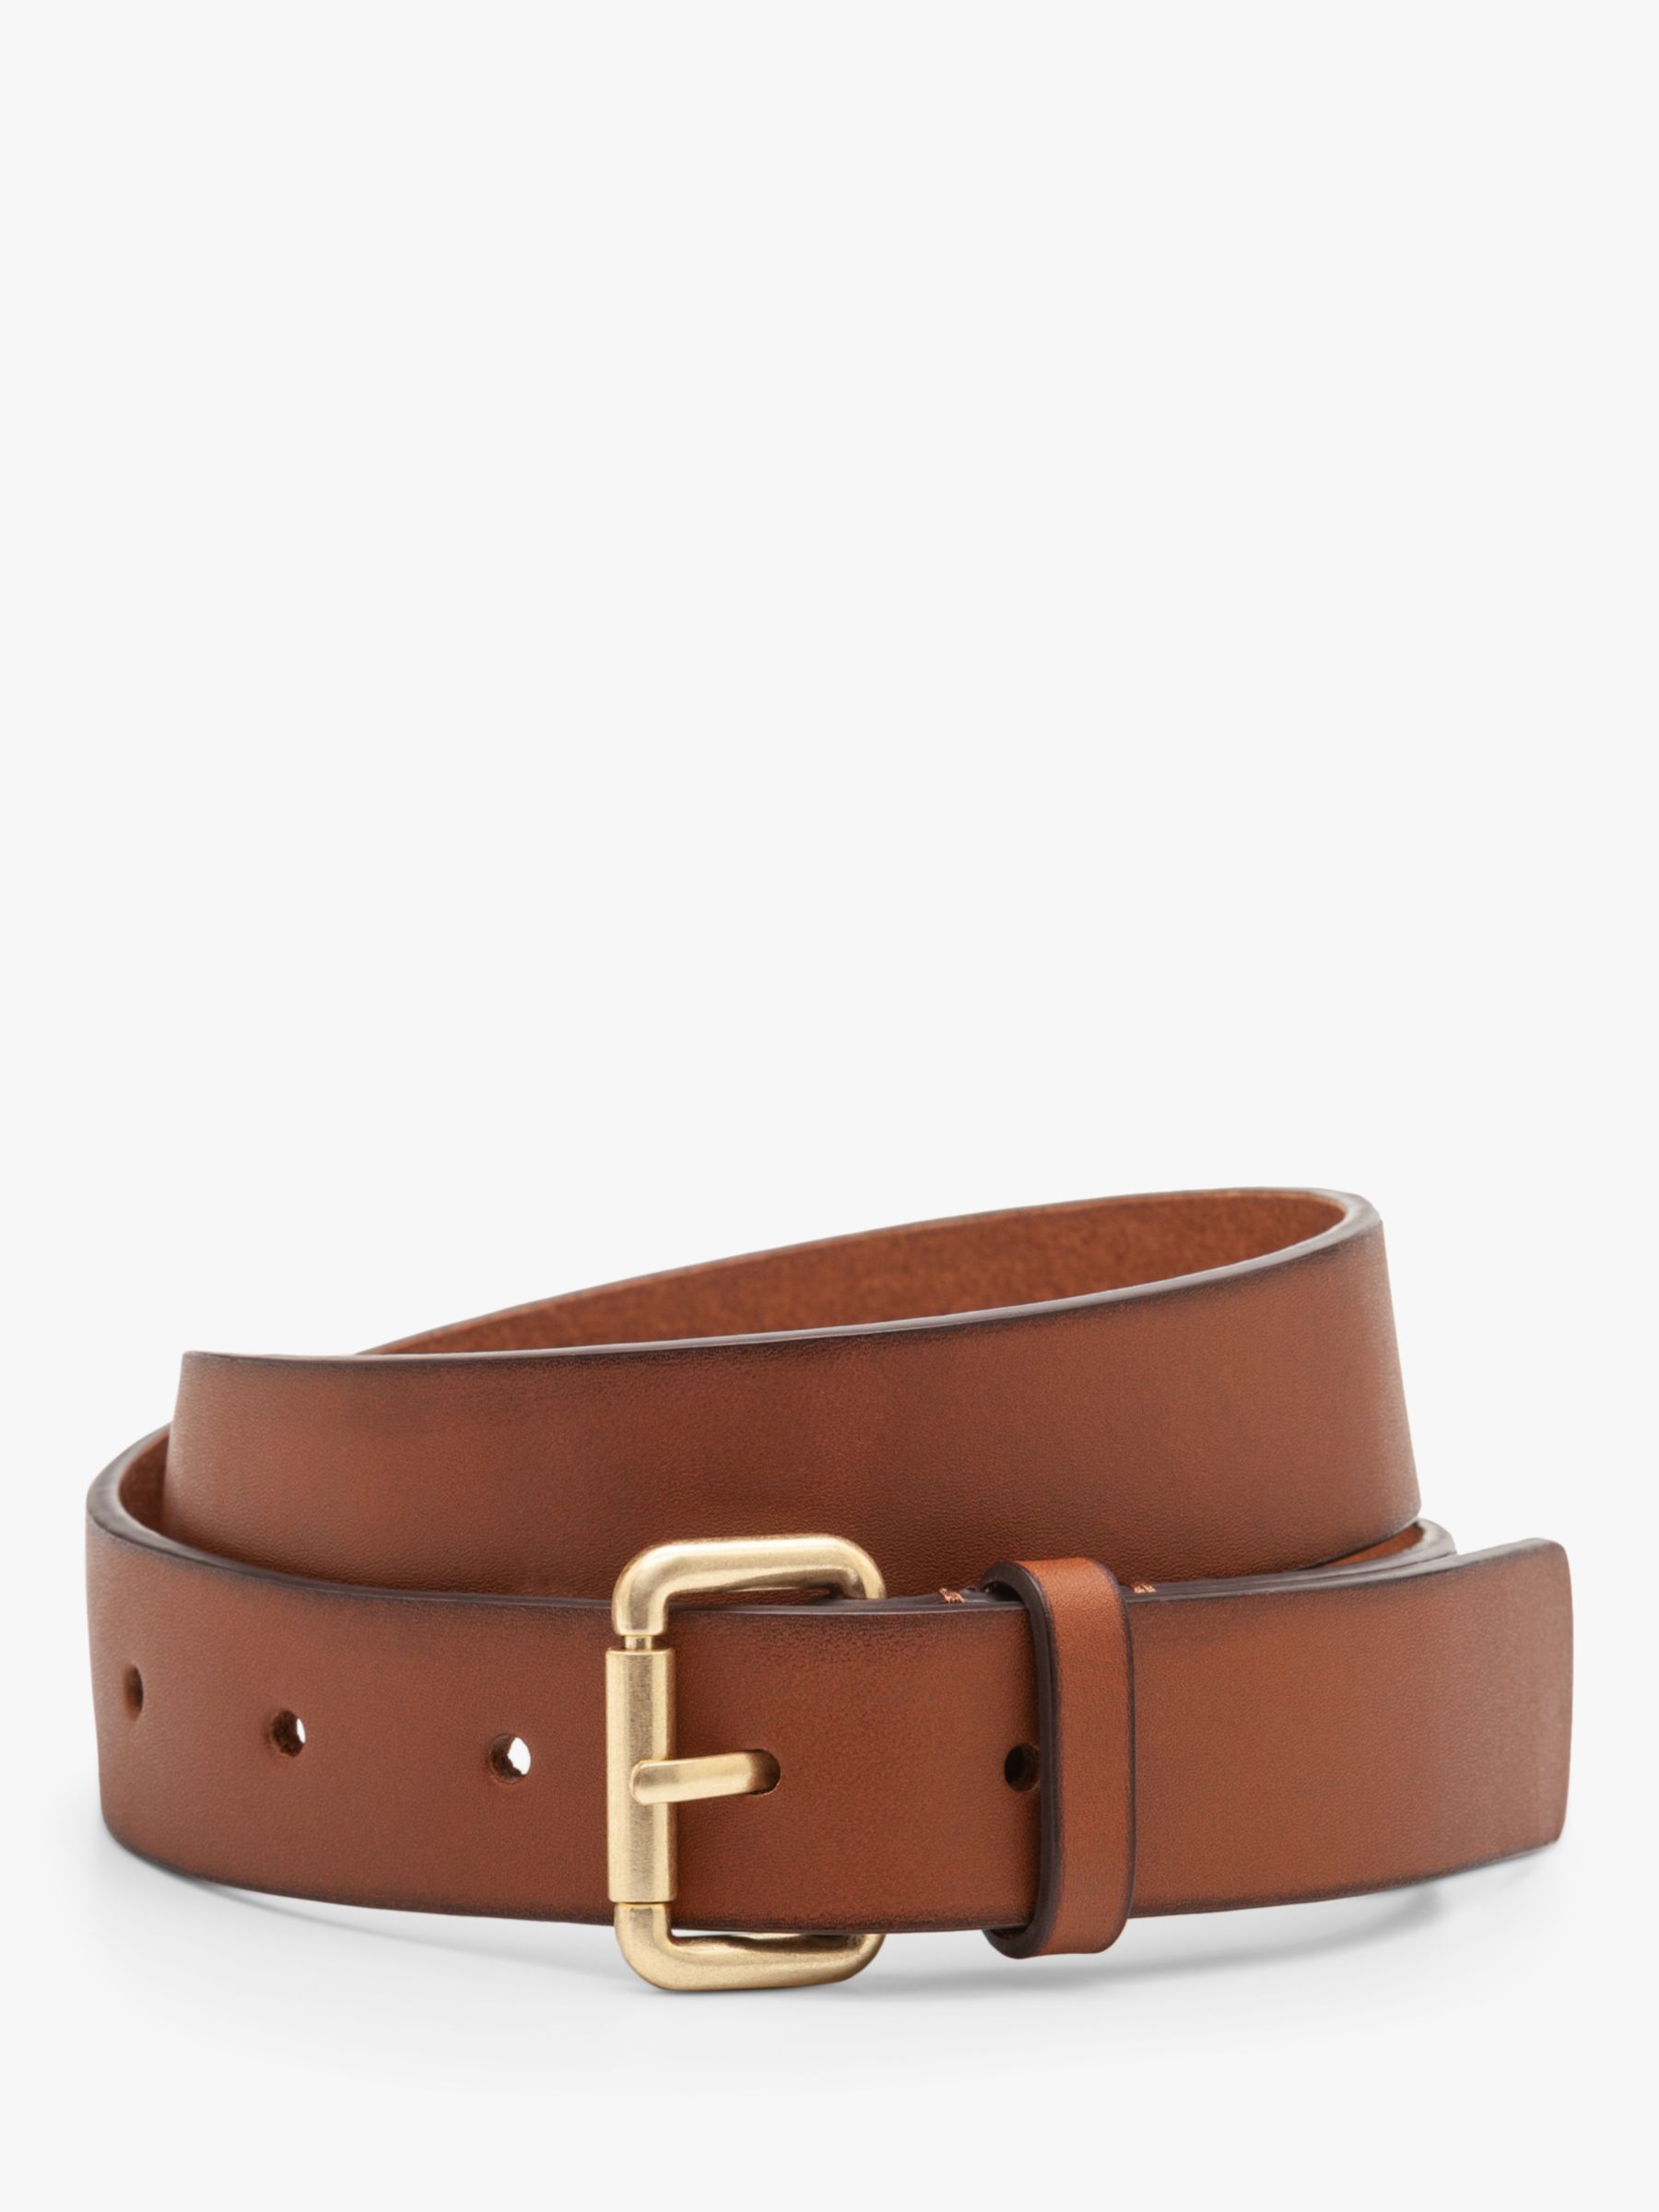 Boden Classic Leather Buckle Belt, Tan